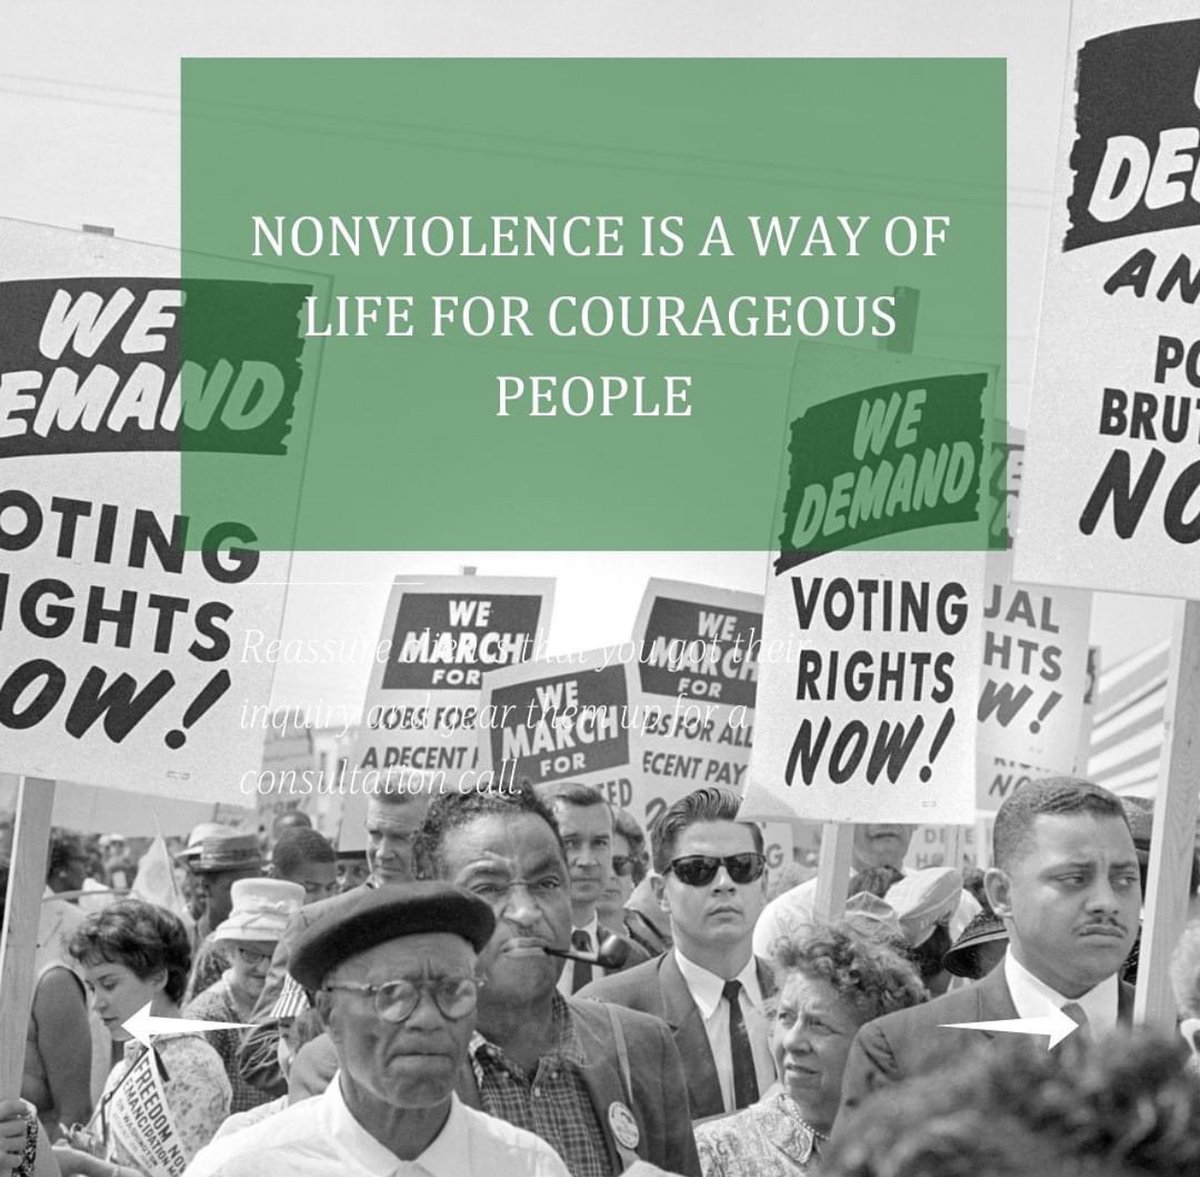 Nonviolence isn't weakness; it takes courage. Embrace #KingianNonviolence for lasting change. Join us and be transformed: thekingcenterinstitute.org